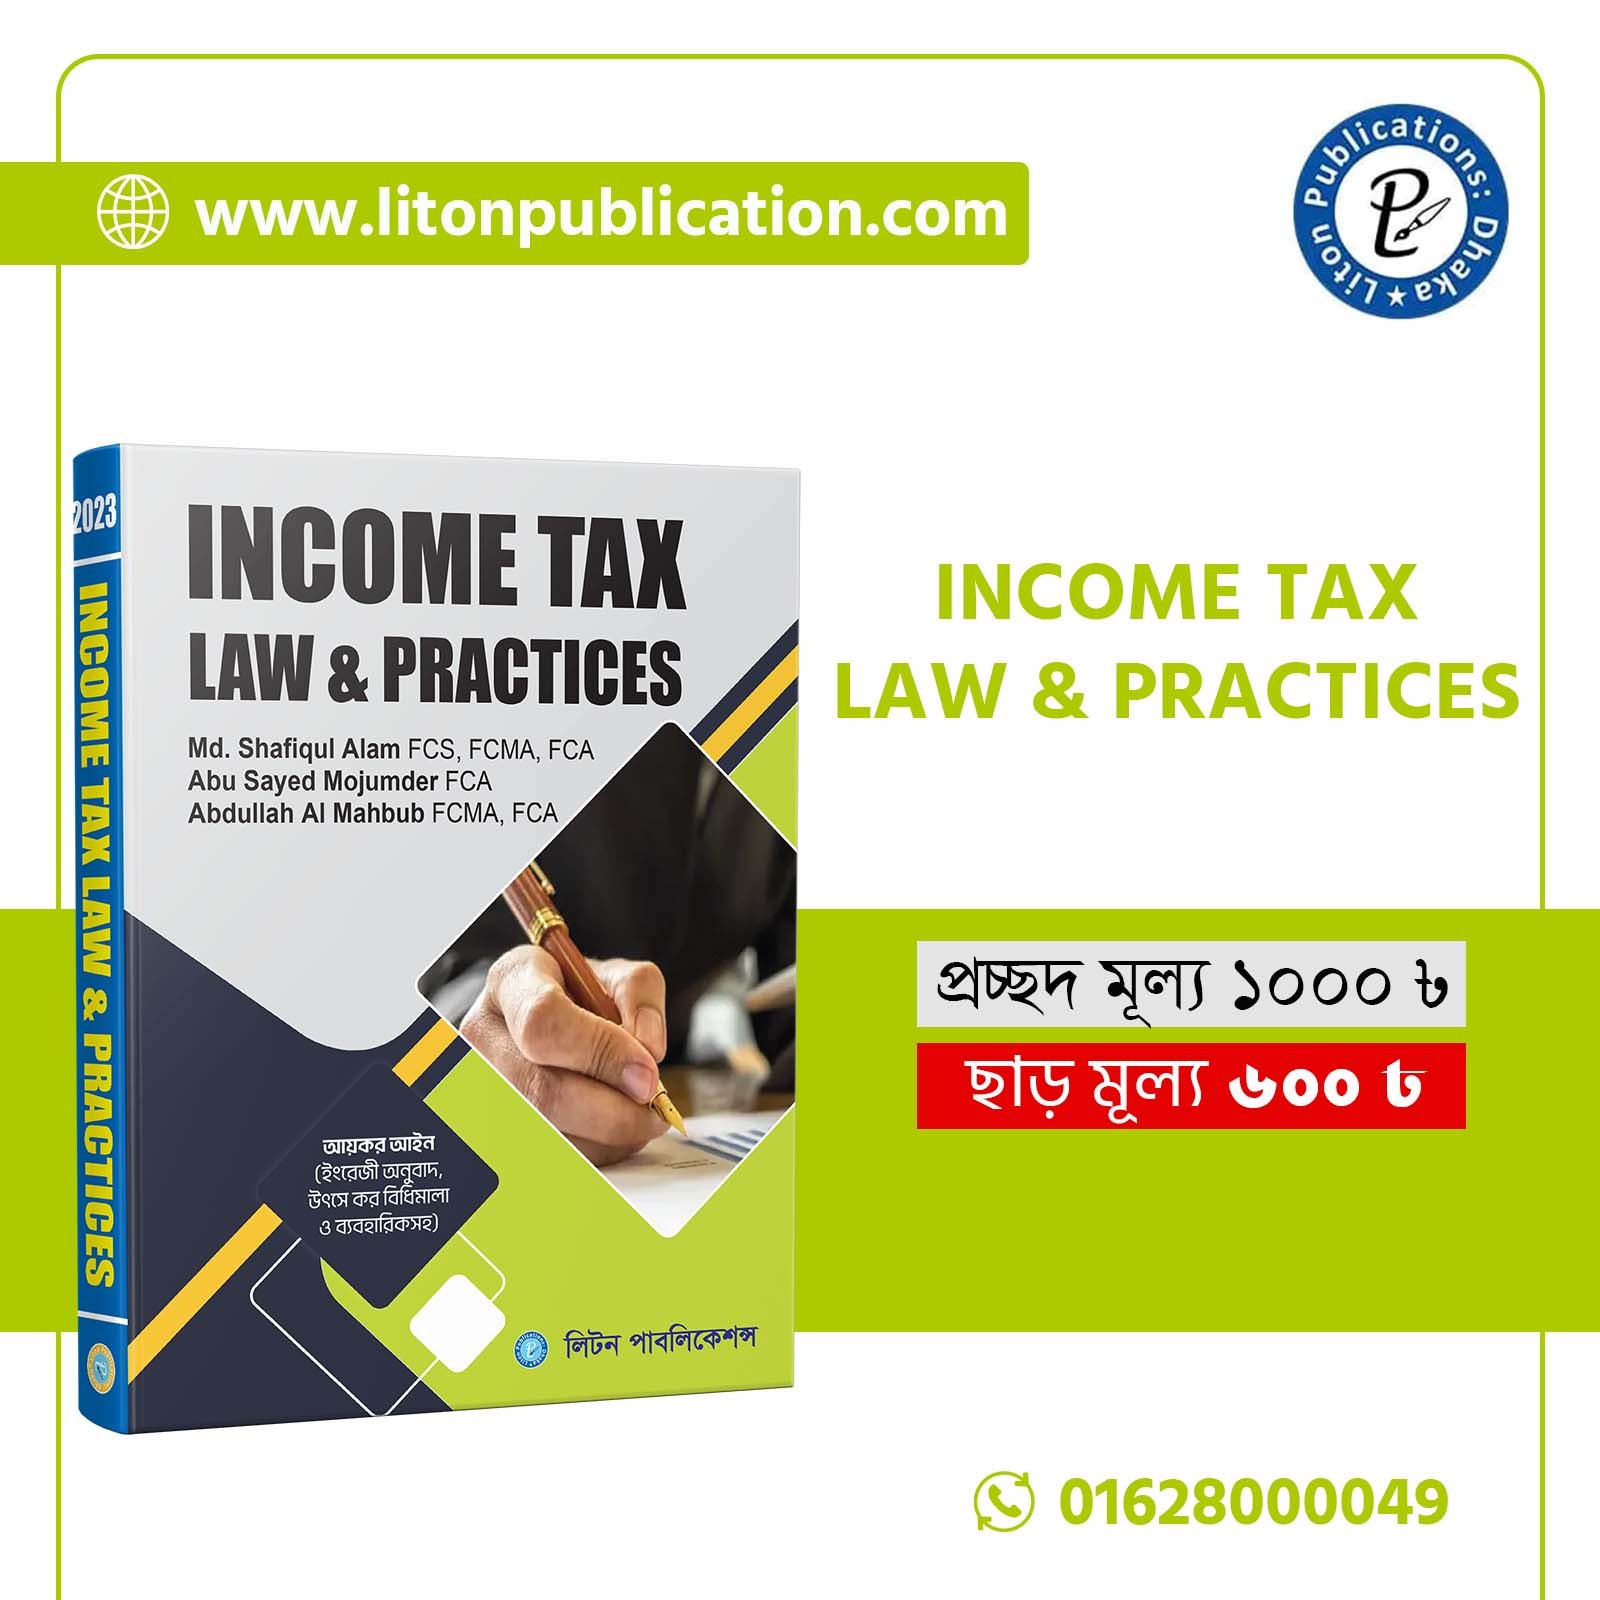 Income Tax Law & Practices